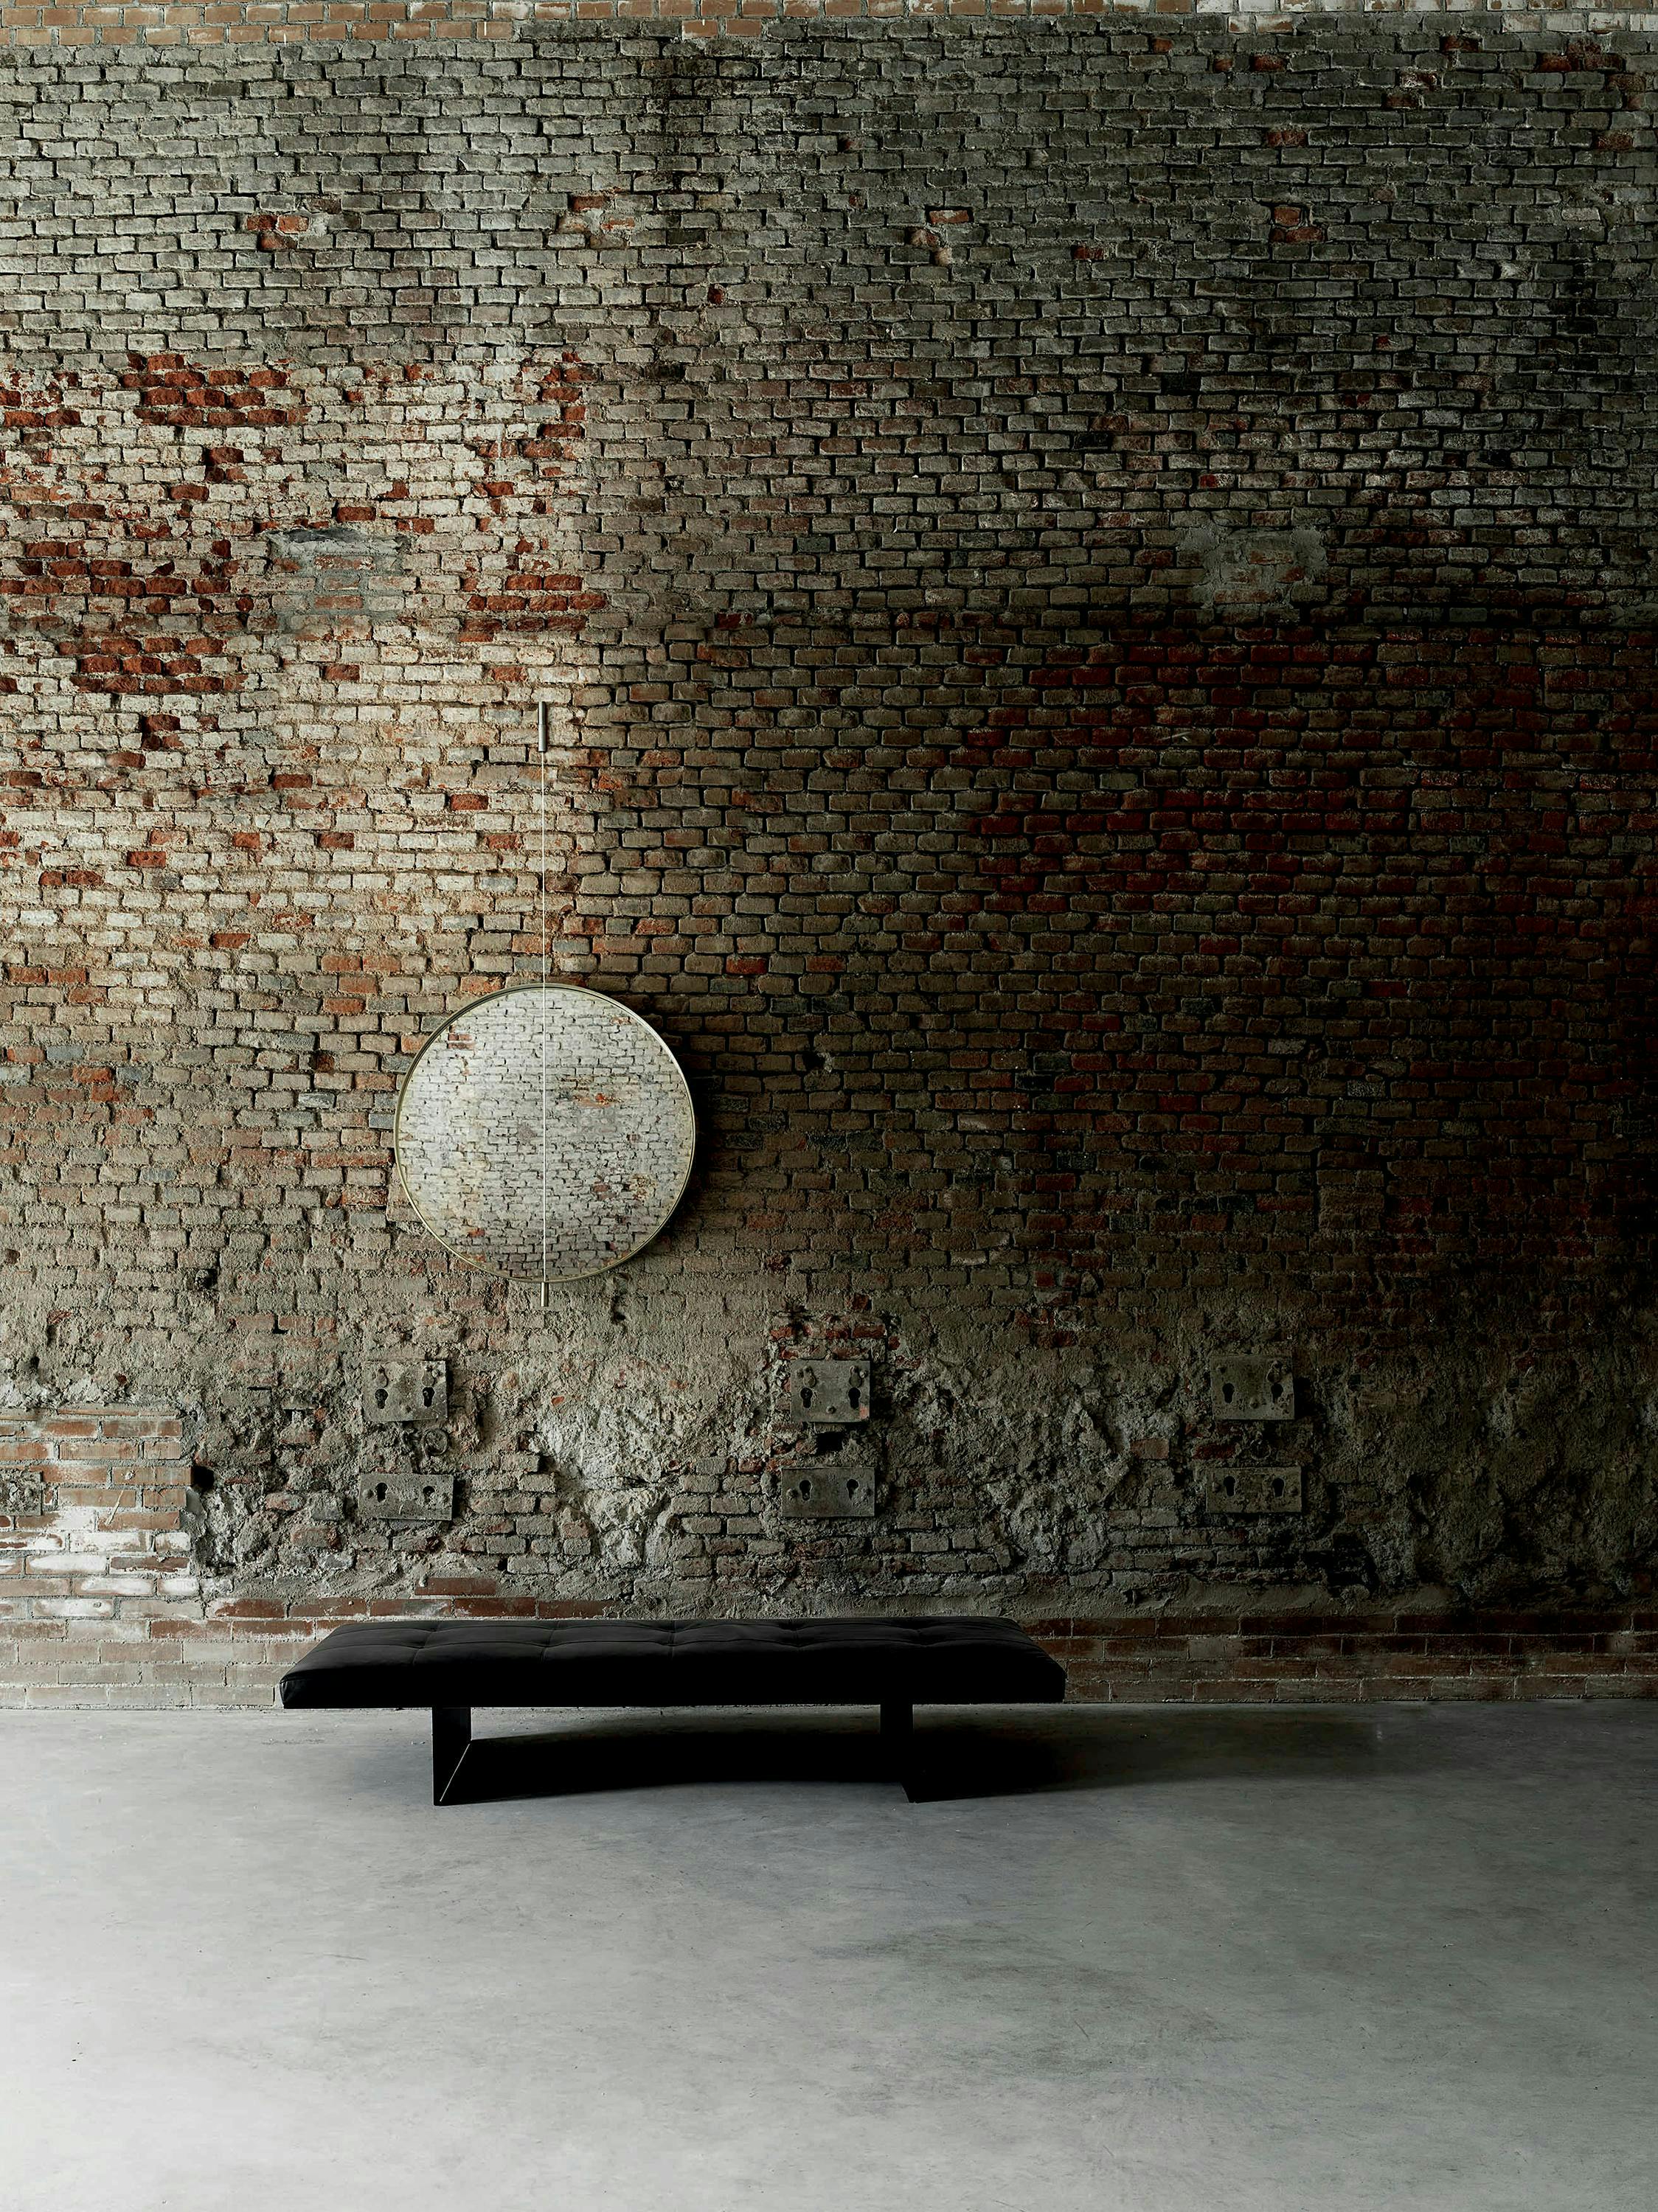 wall building architecture brick sphere bench furniture